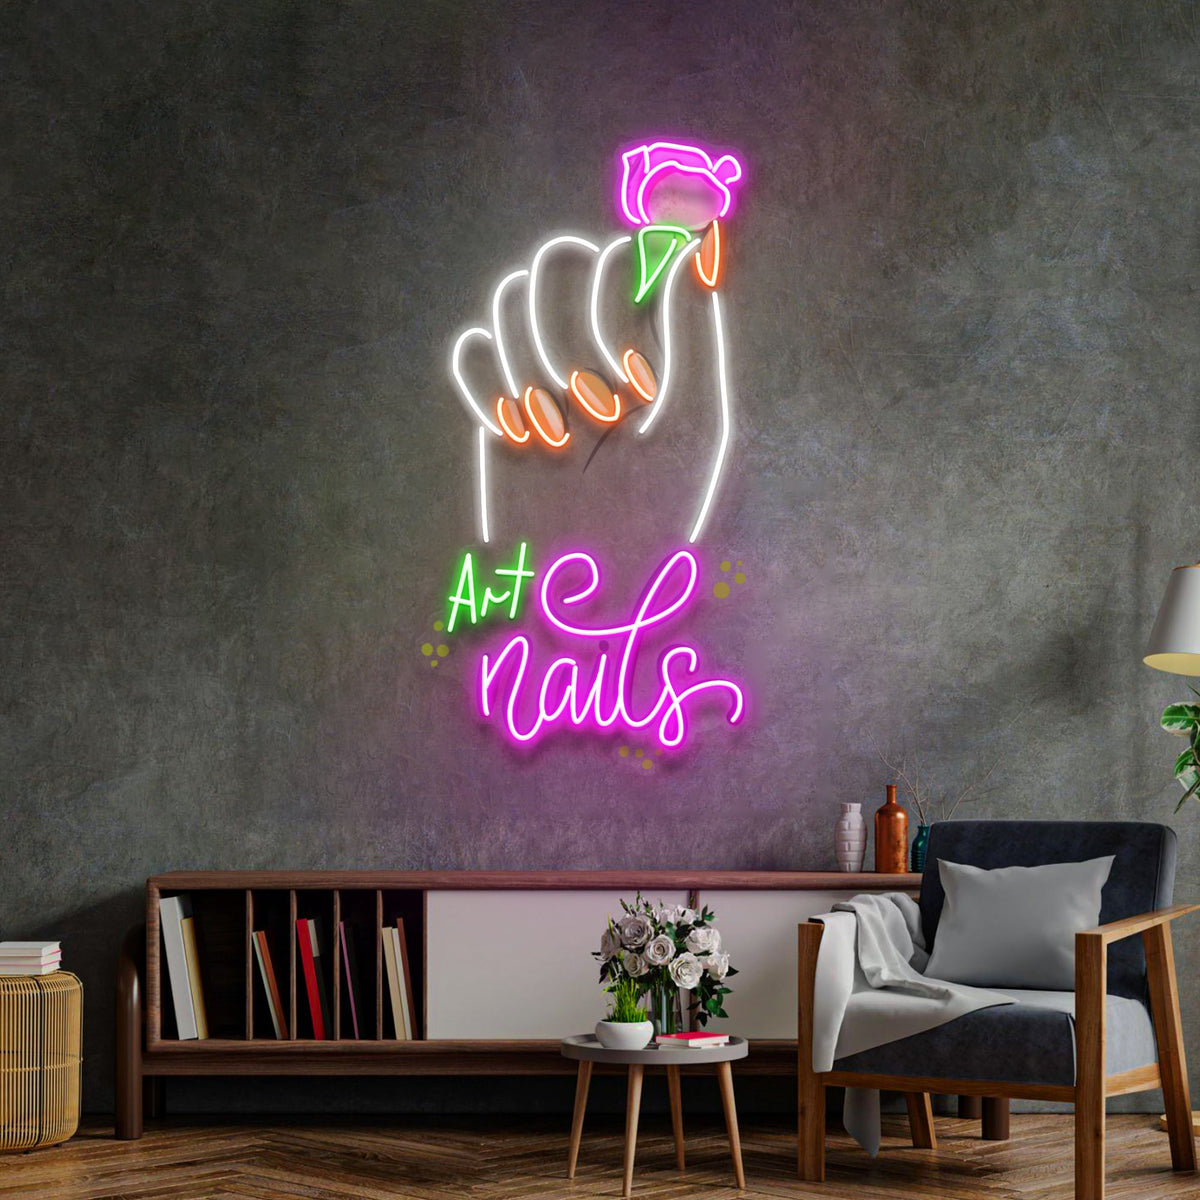 Nails Room Neon Light Sign Beauty Room Decoration LED Neon Sign